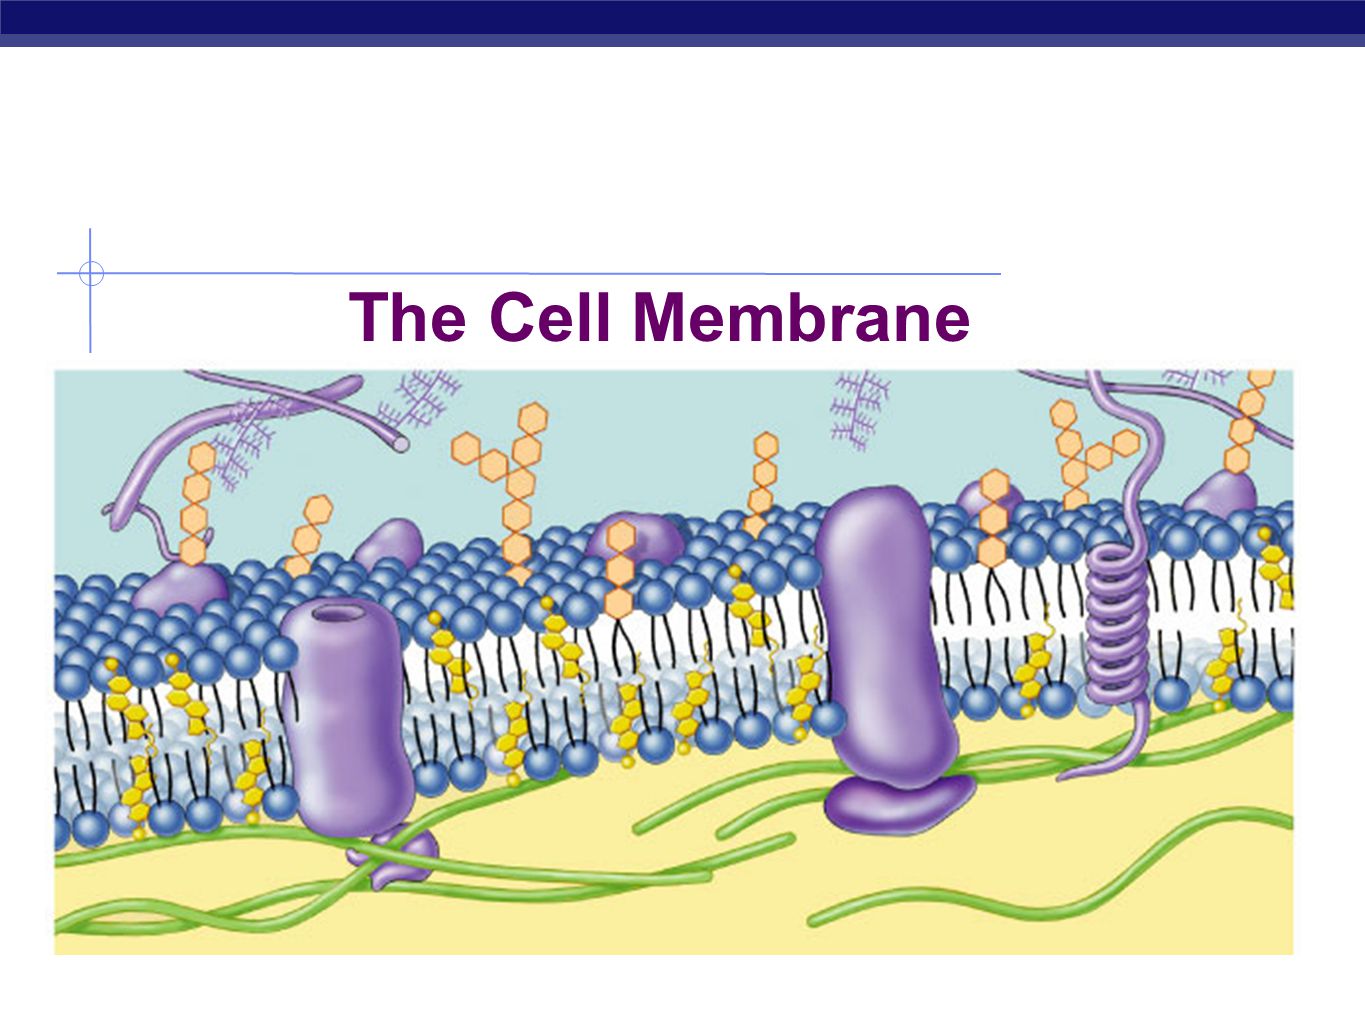 SOLVED: Correctly Identify the following parts of the cell membrane: -  Cytoskeleton - Integral Protein - Carbohydrate - Pore Protein - Cholesterol  - Phospholipid Bilayer - Membrane Protein